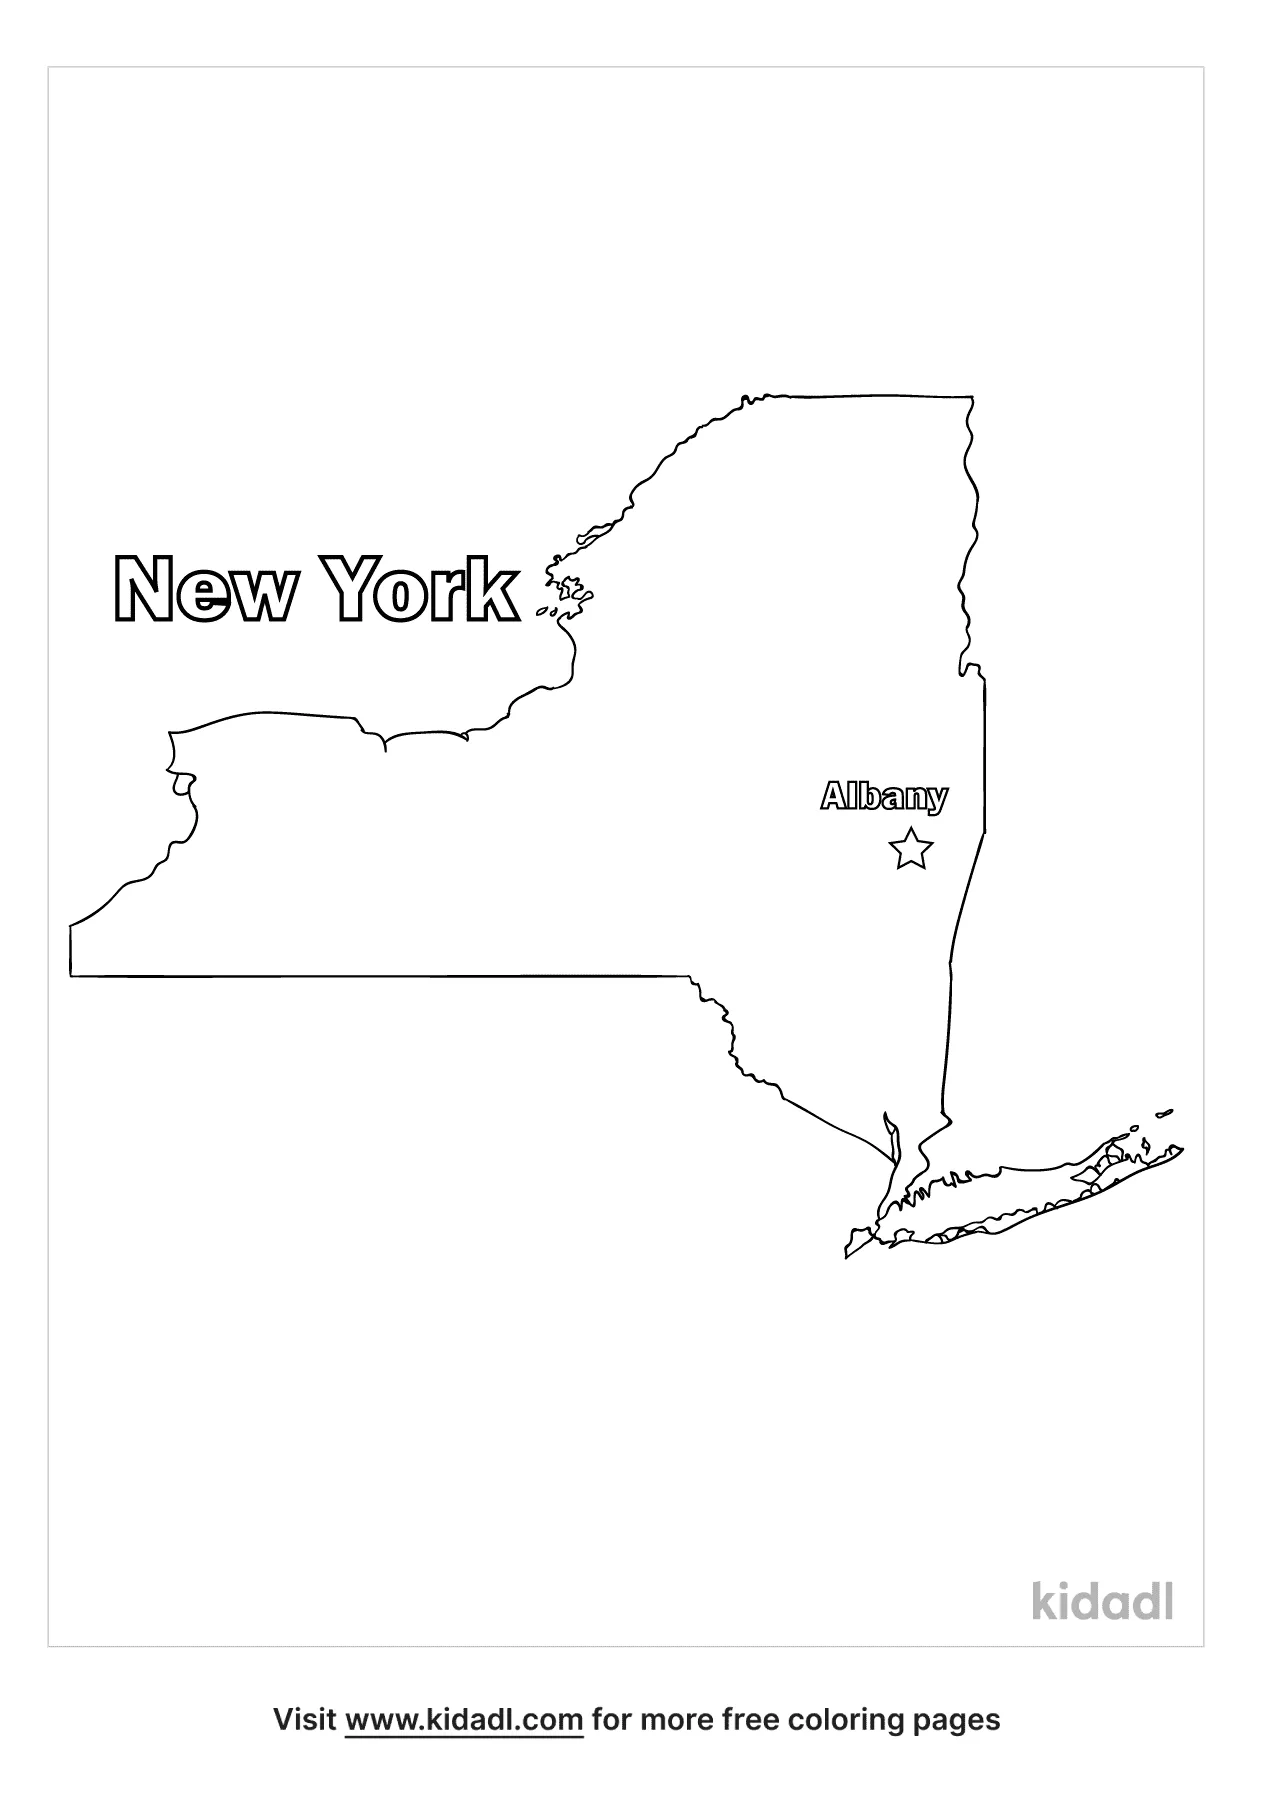 Free new york city map coloring page coloring page printables